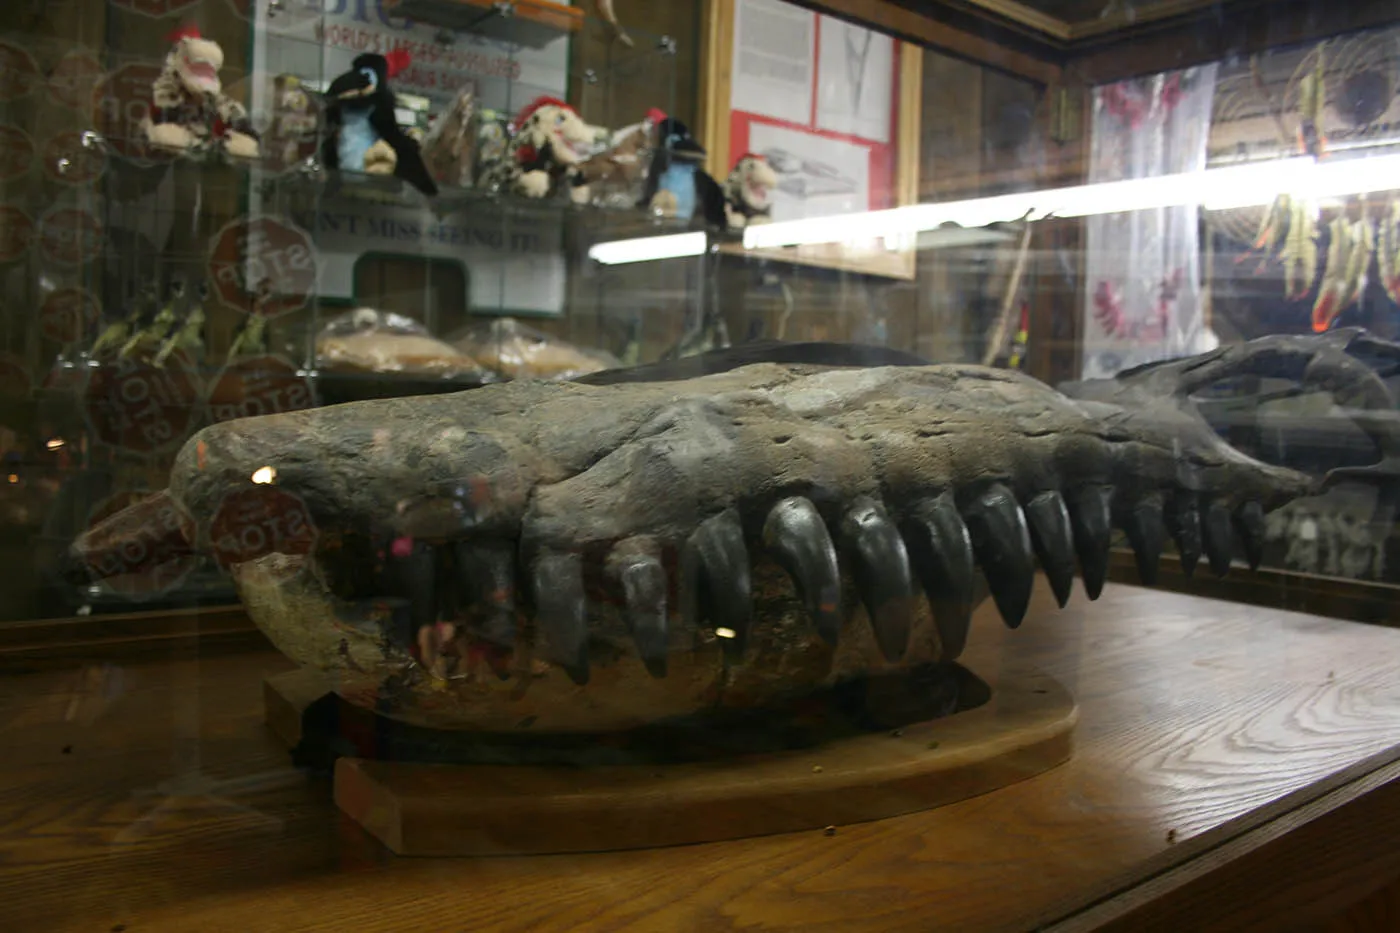 Big Mo mosasaur fossil at Big Mike's Mystery House in Cave City, Kentucky